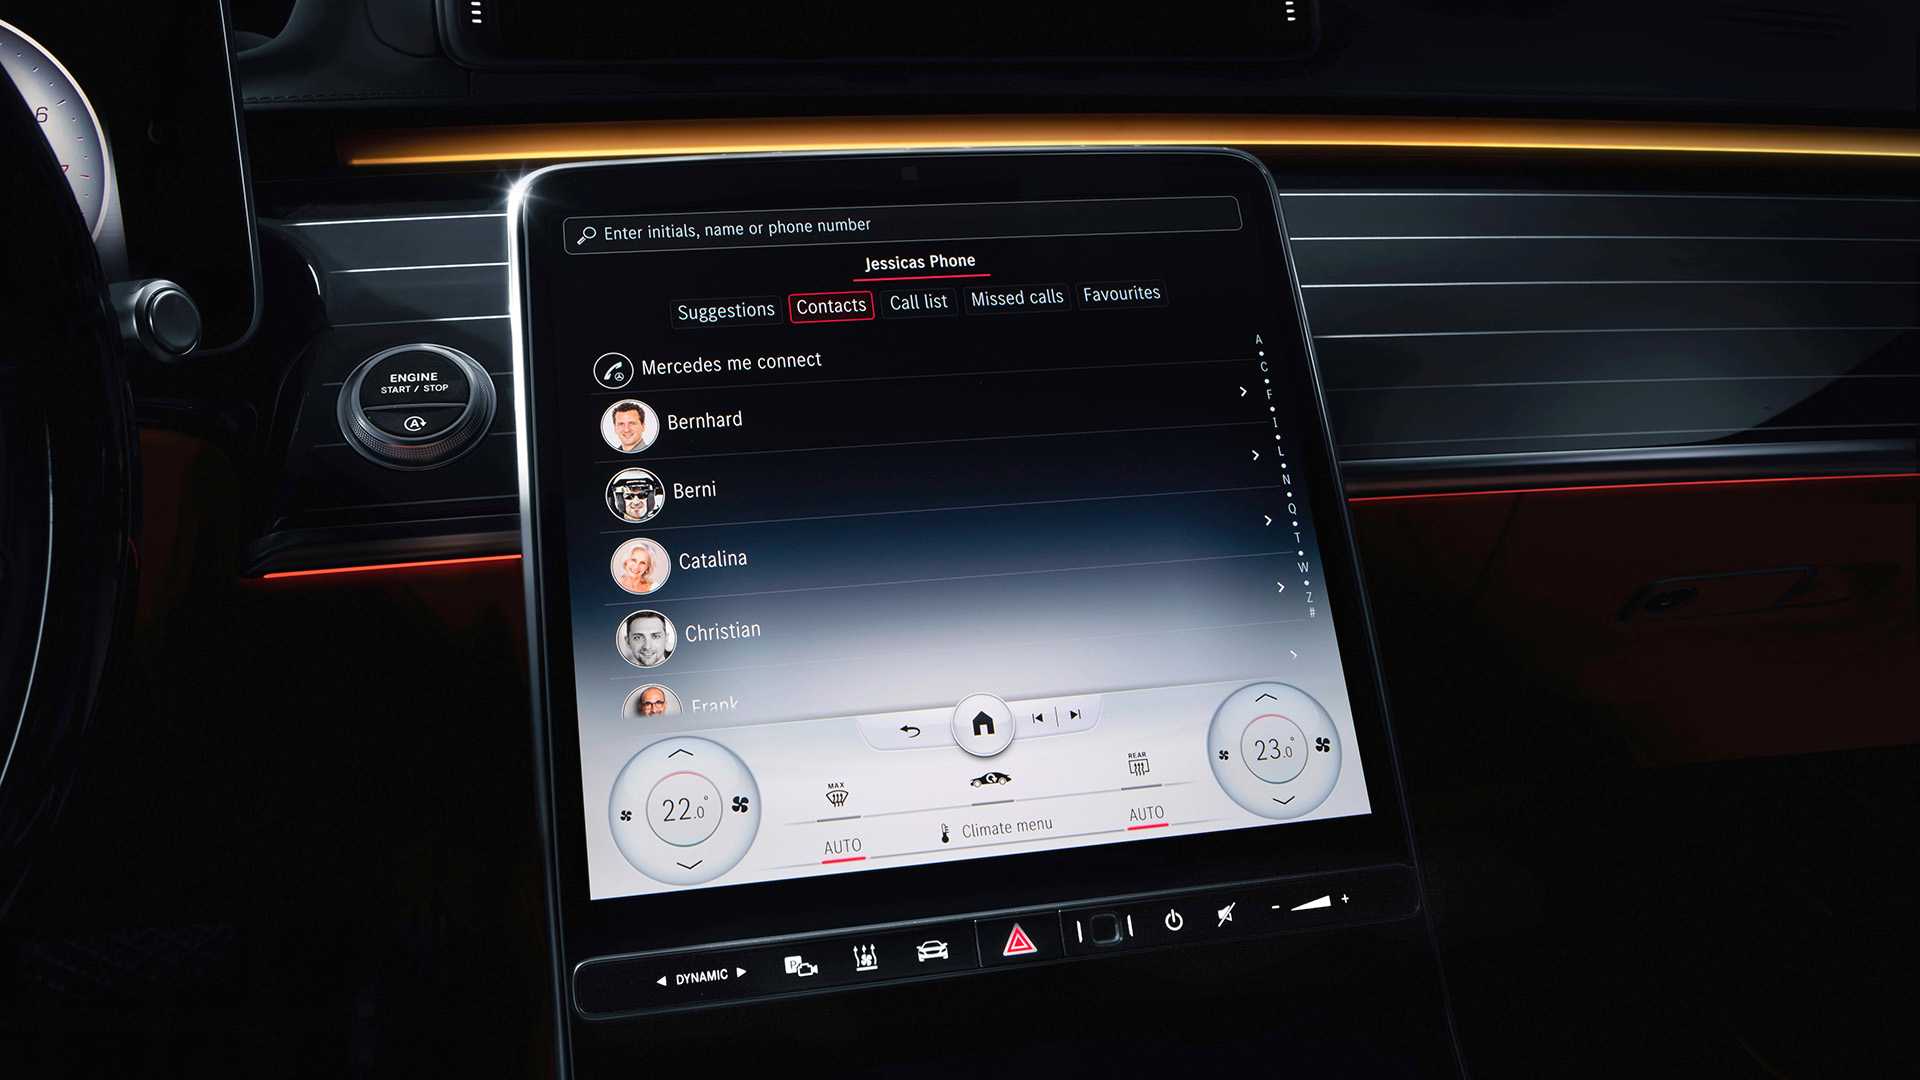 Infotainment systems in new cars are becoming flashy, feature-packed  distractions.